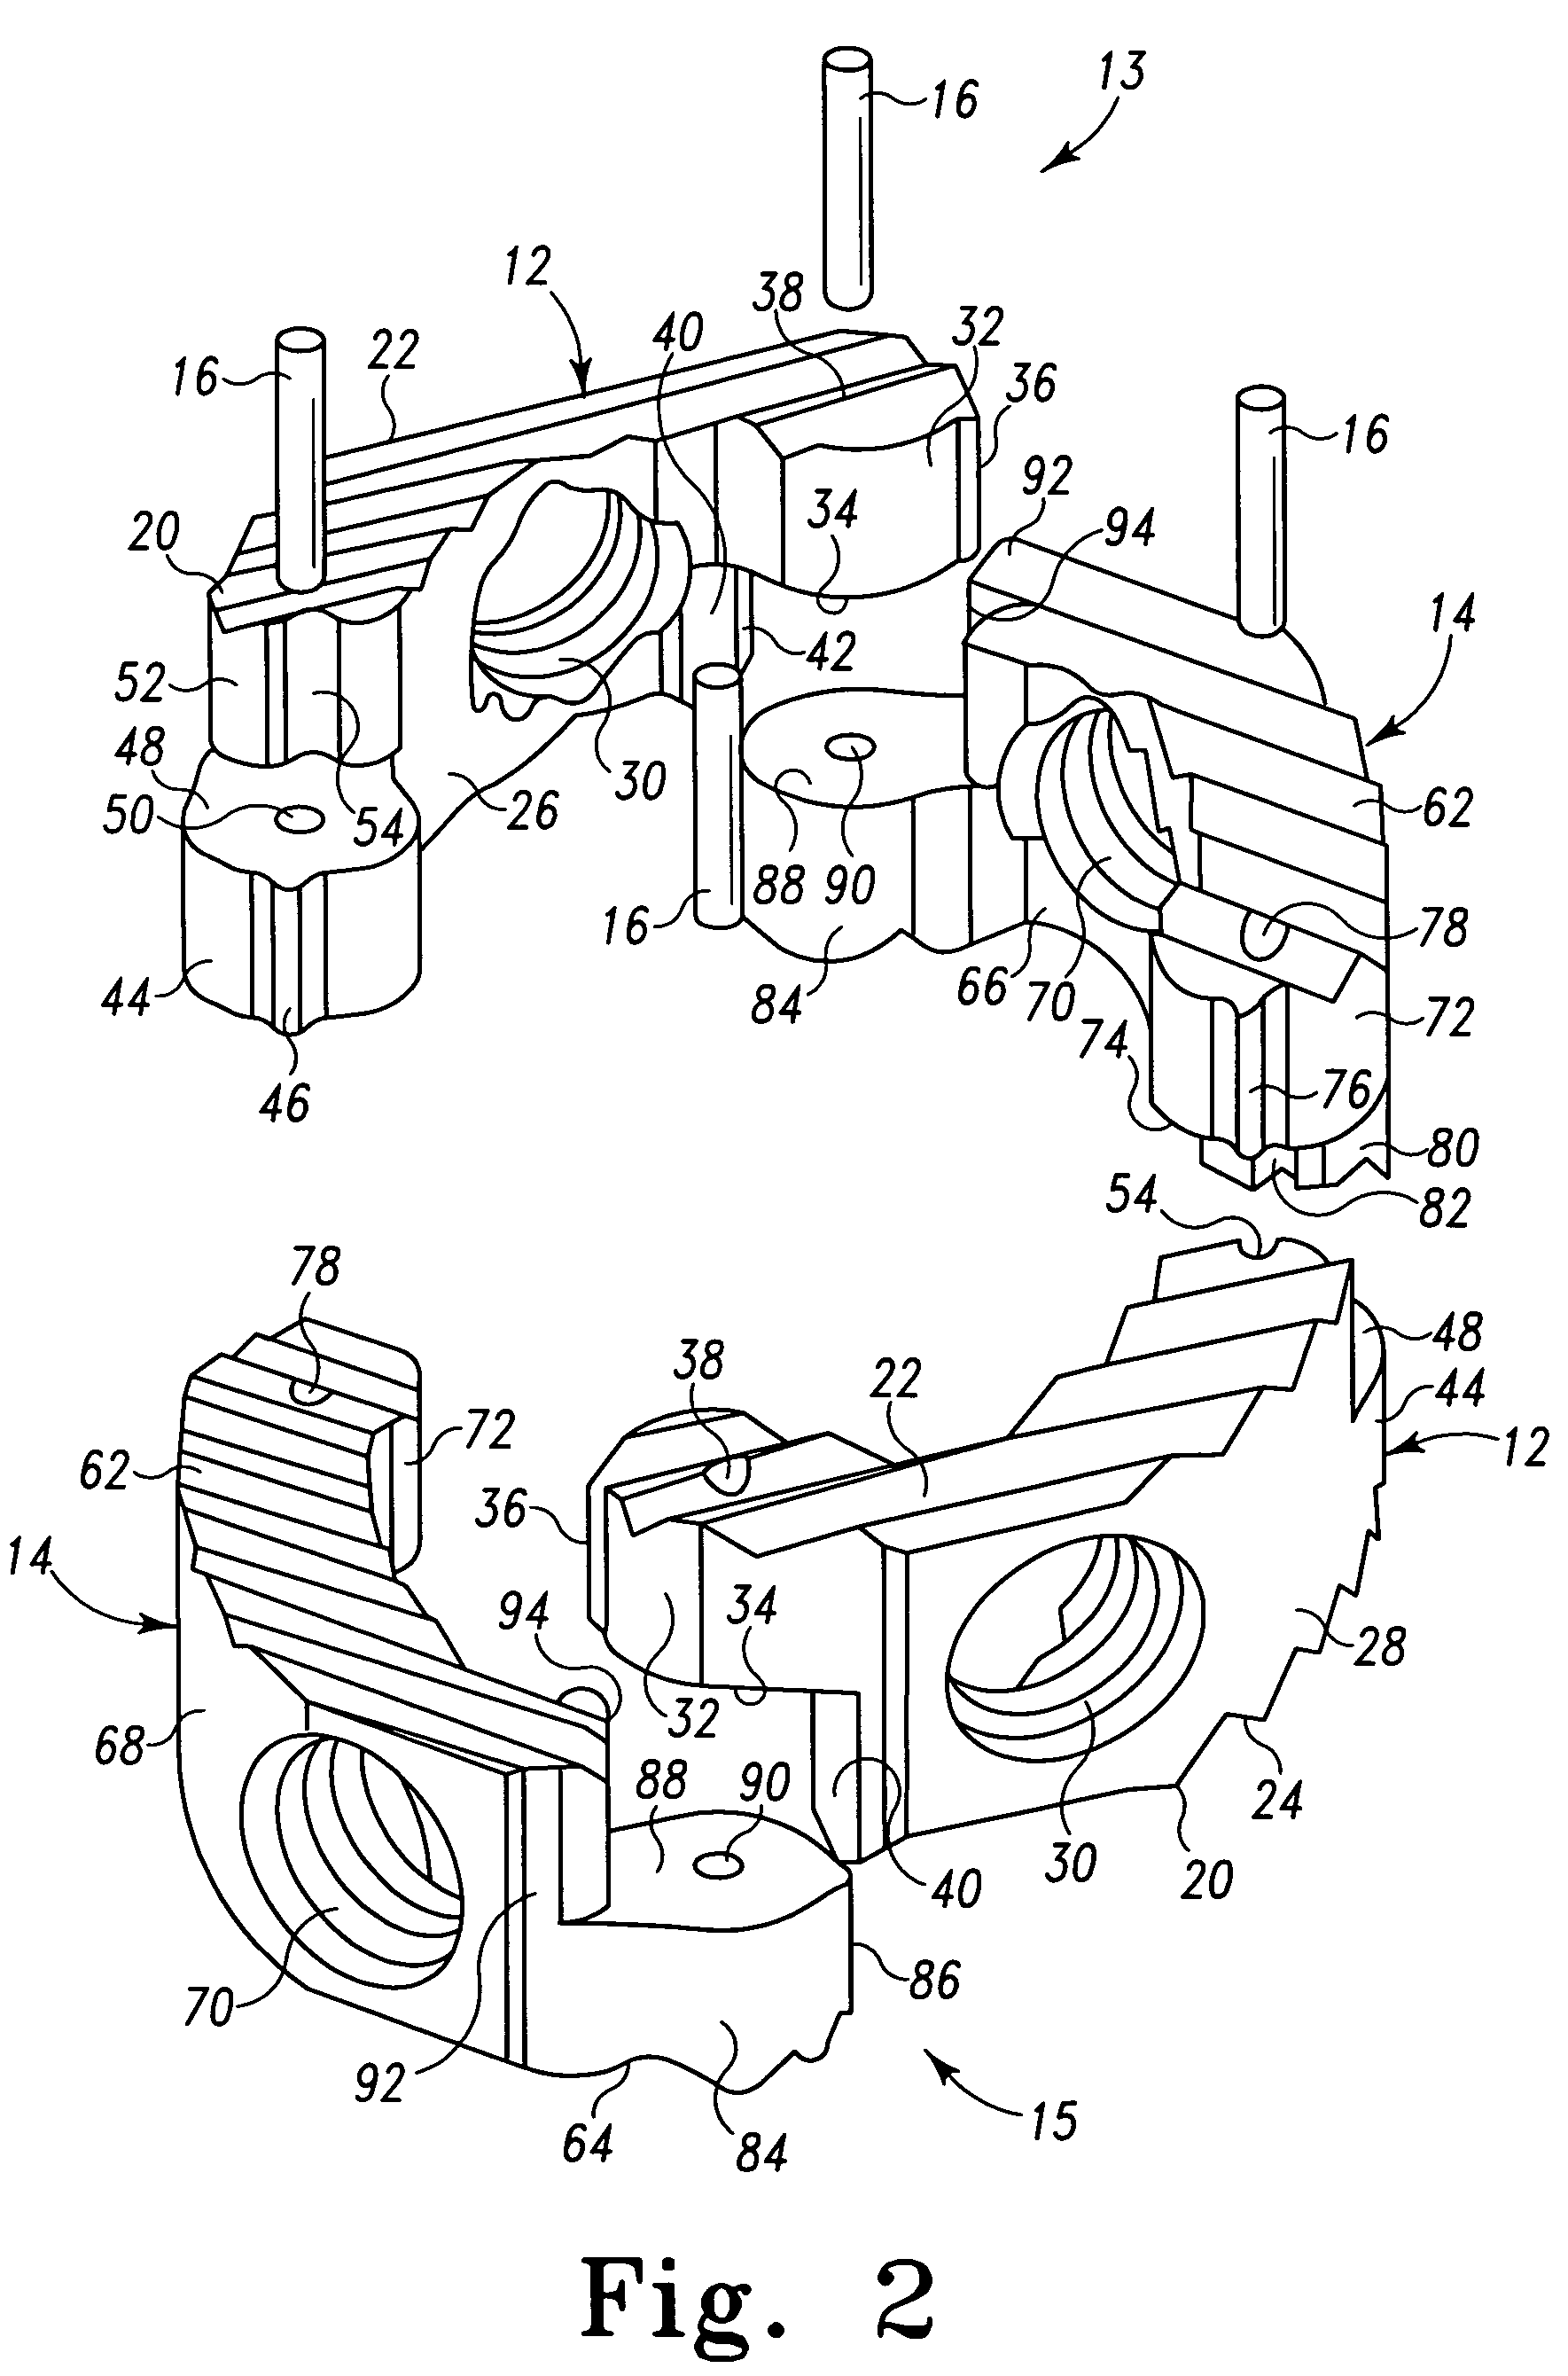 Radially expandable spinal interbody device and implantation tool